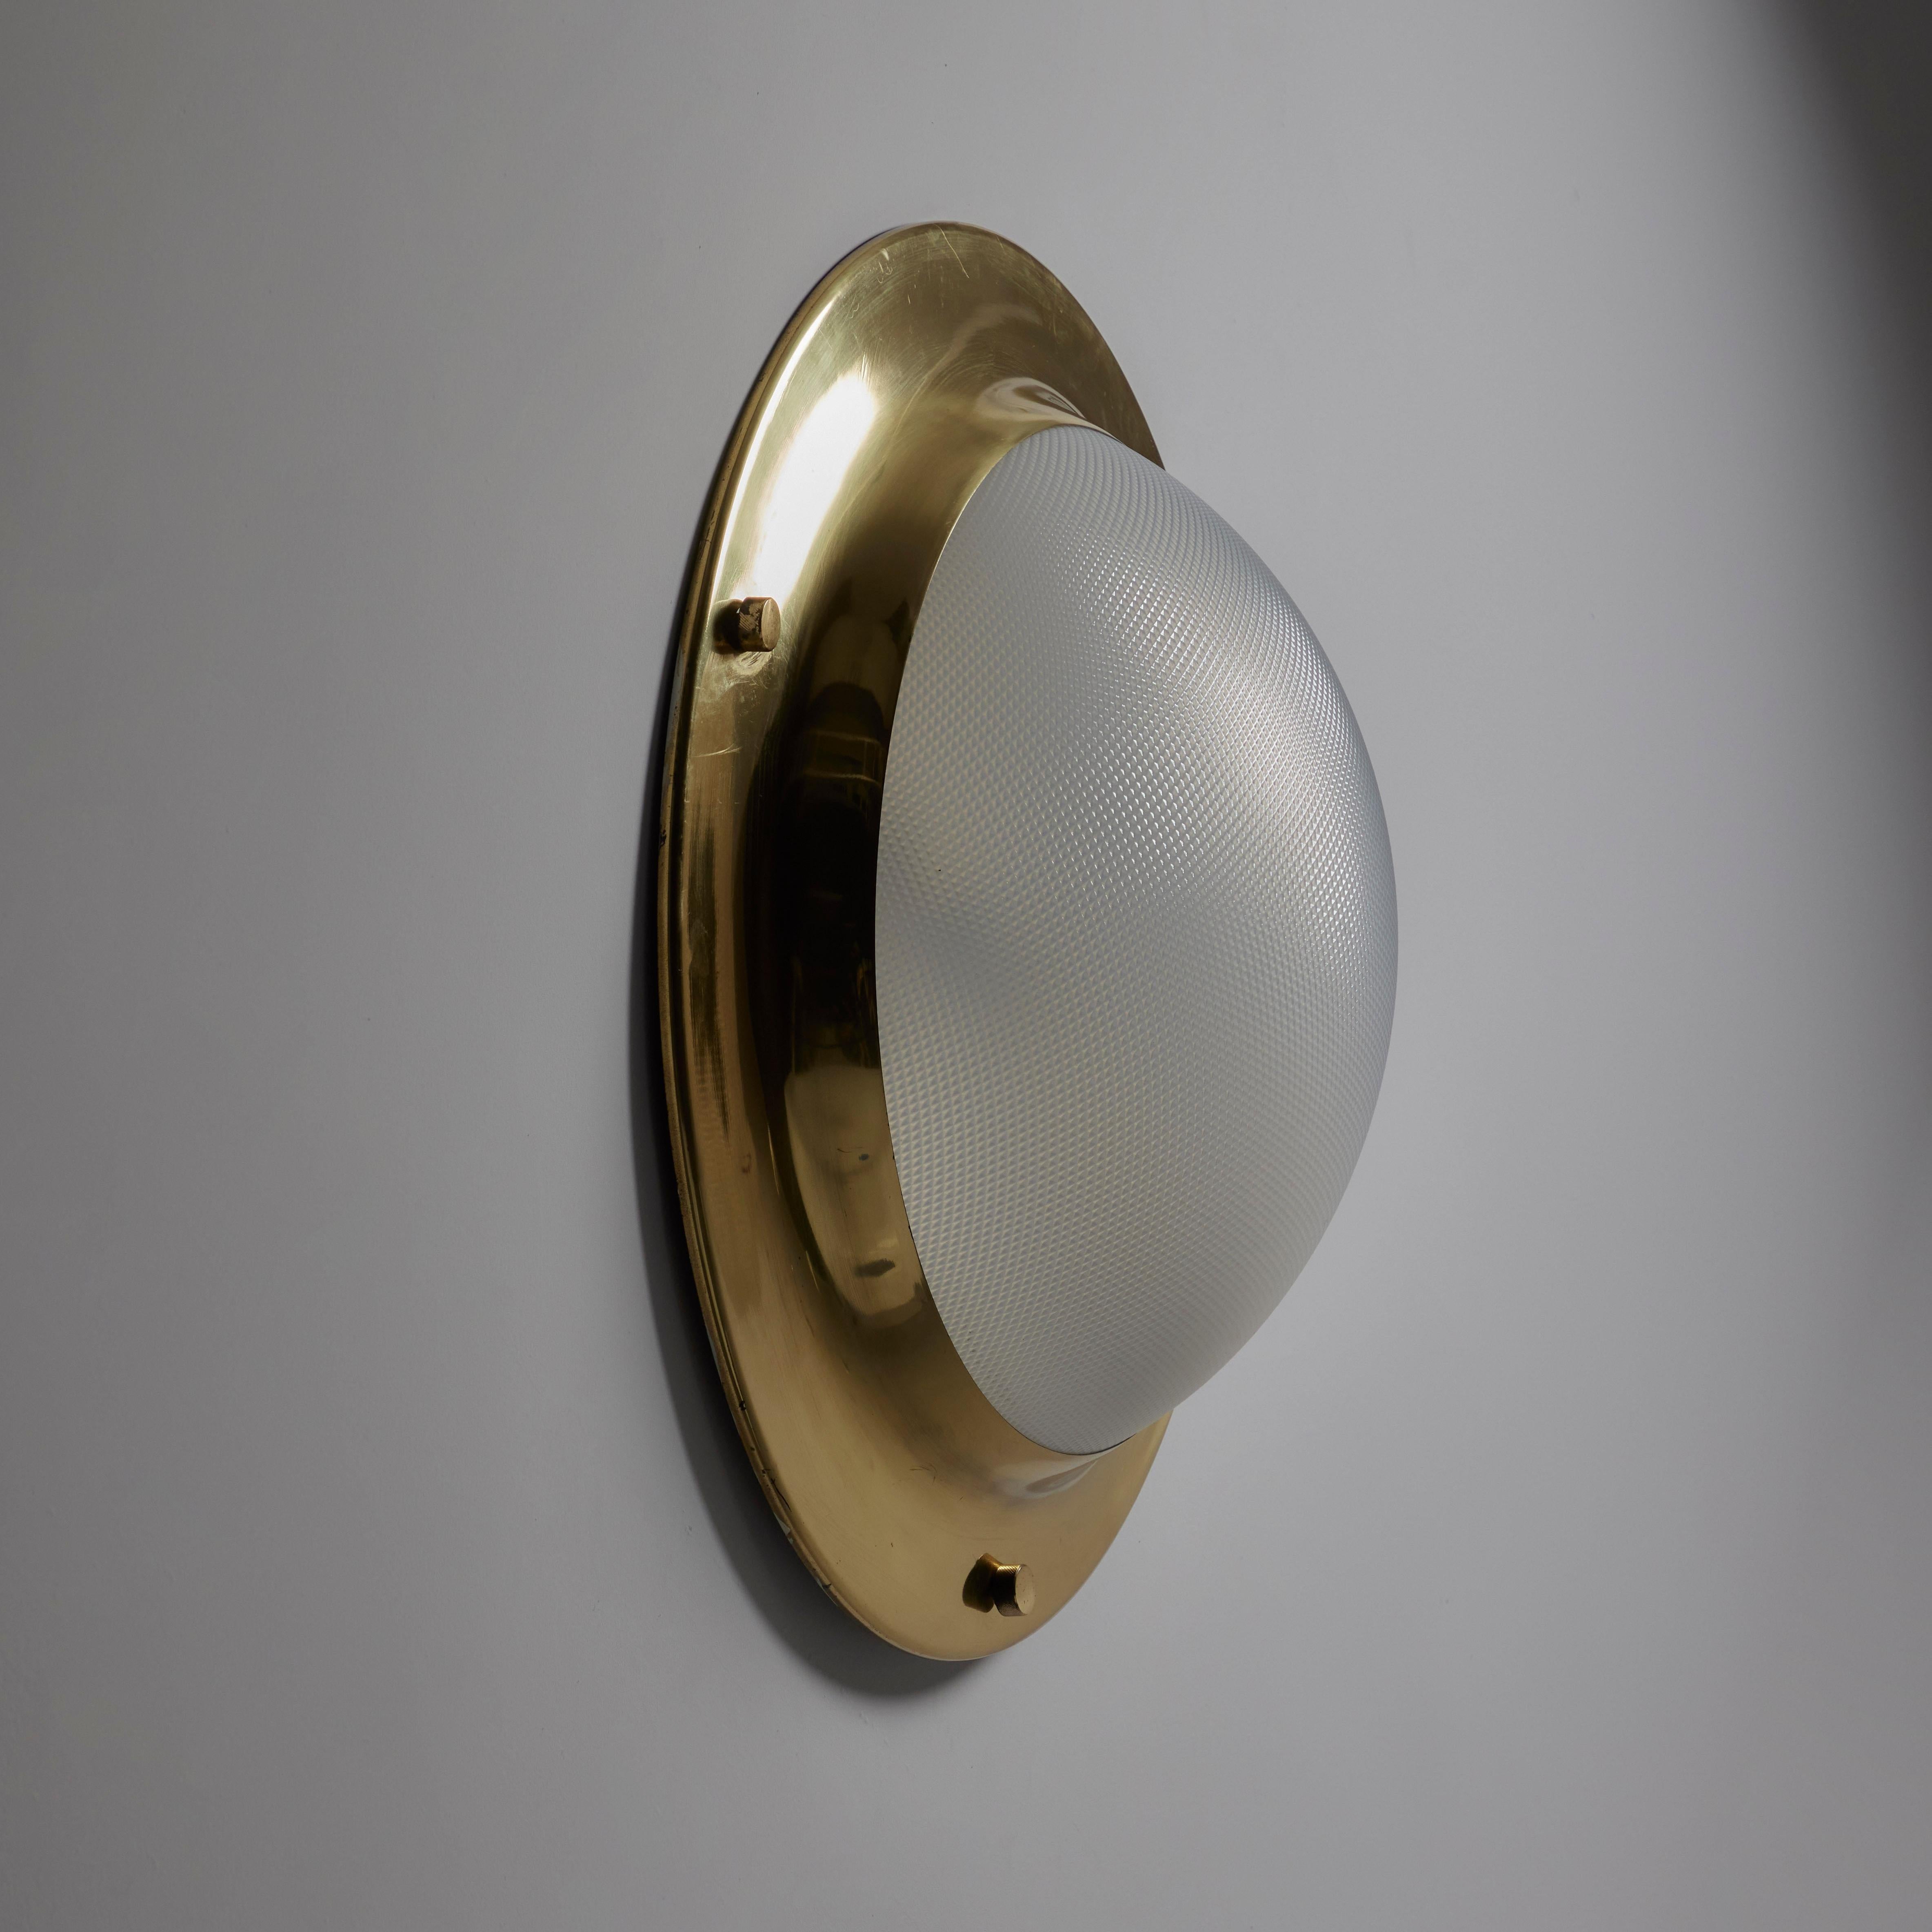 XL Model LSP6 'Tommy' Wall Sconce by Luigi Caccia Dominioni for Azucena For Sale 8